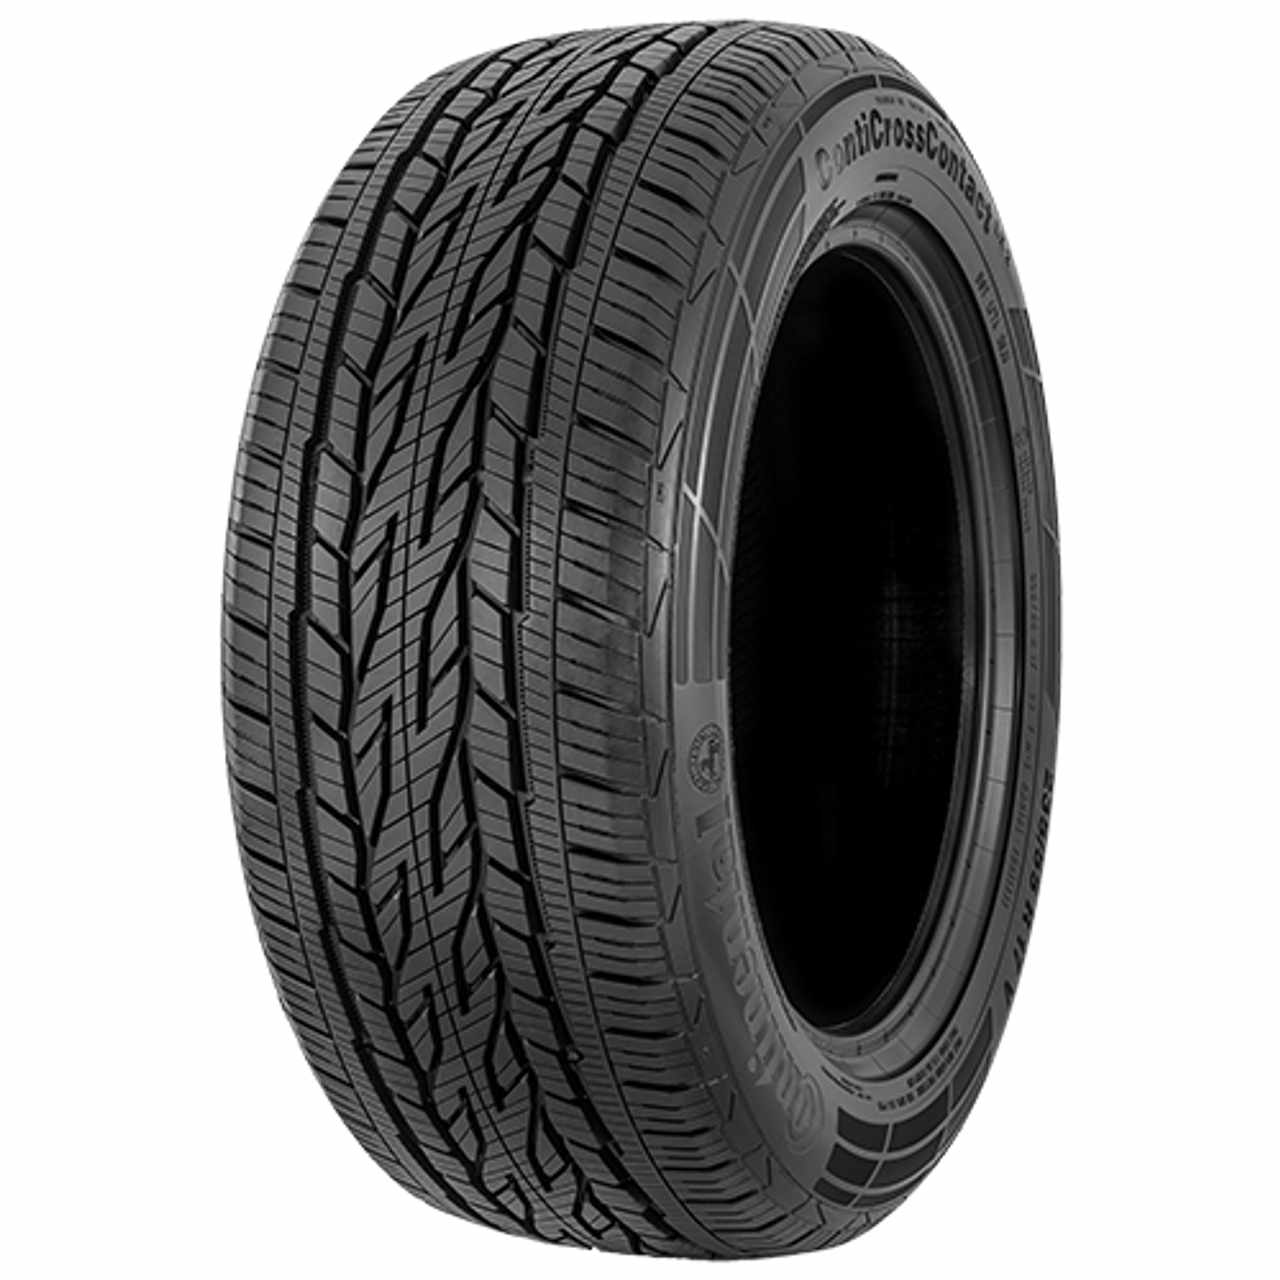 CONTINENTAL CONTICROSSCONTACT LX 2 (EVc) 225/60R18 100H FR BSW